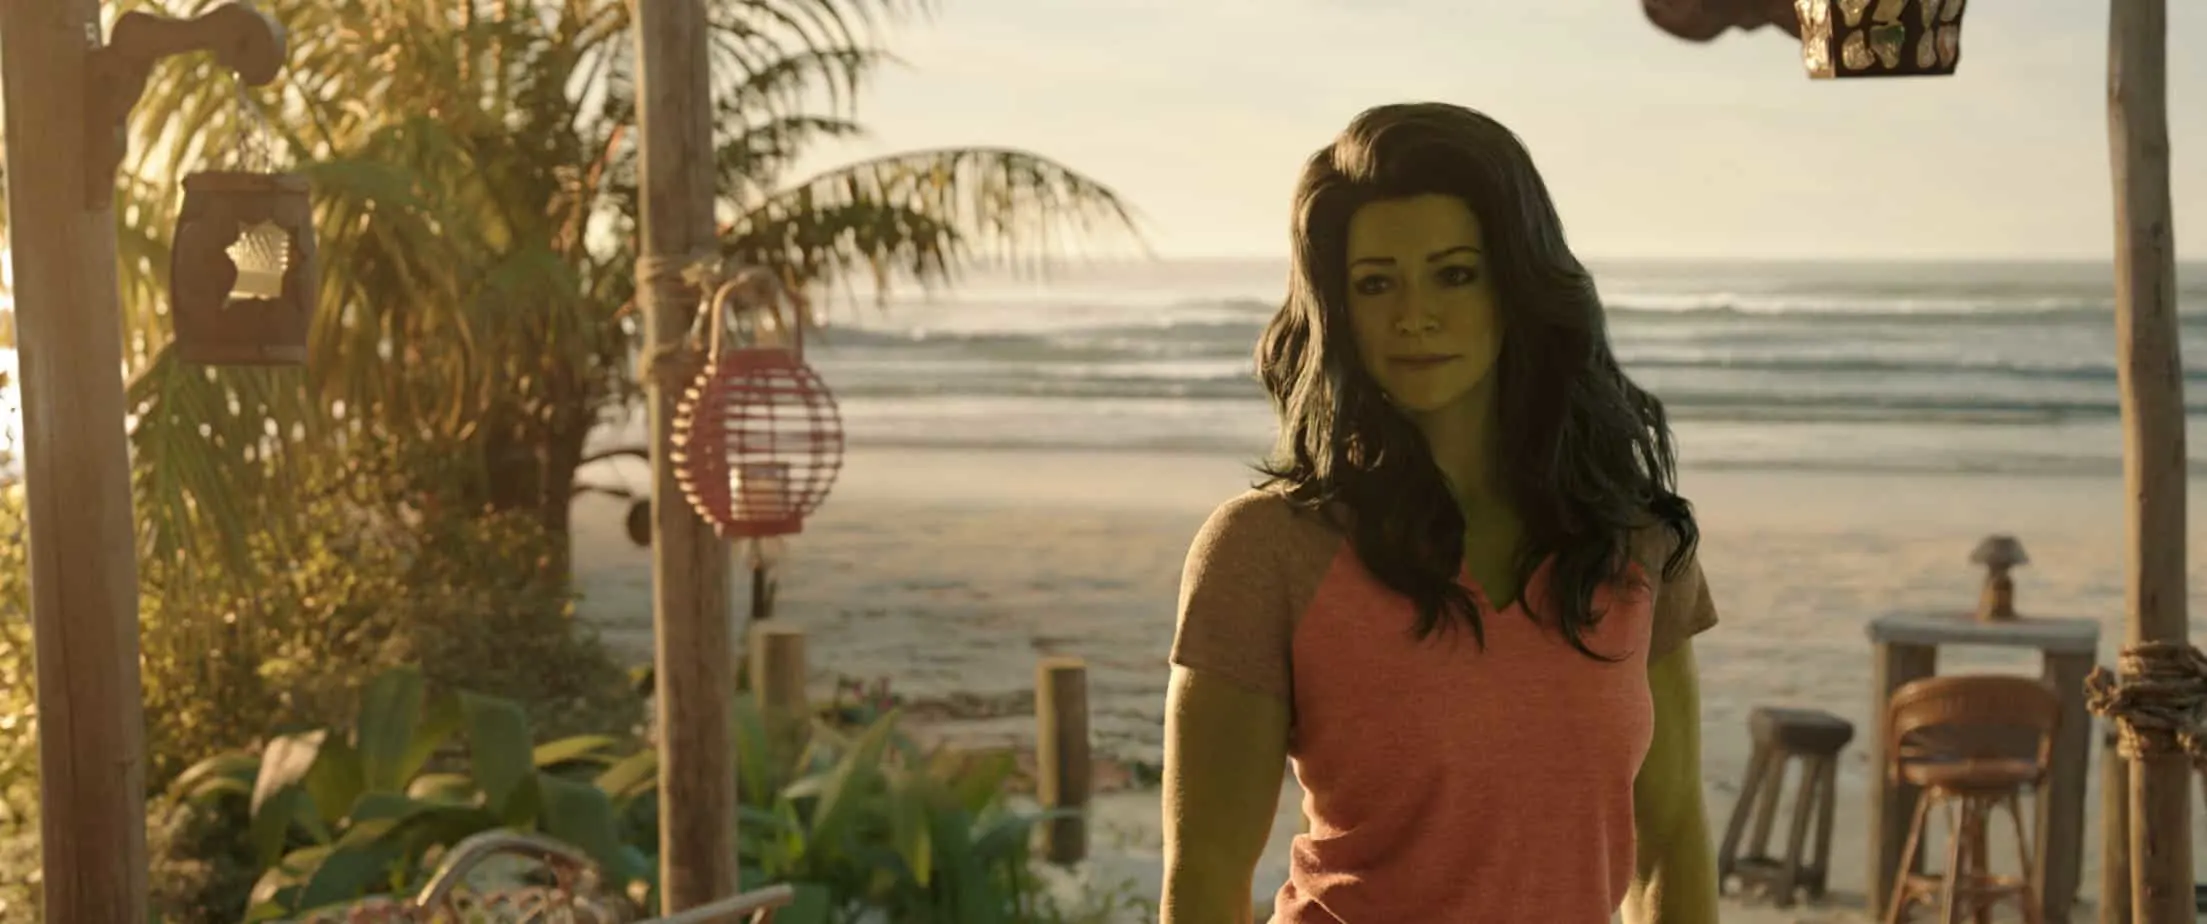 SheHulk (Large green woman) standing facing away from a beach, on a porch. Quotes from SheHulk